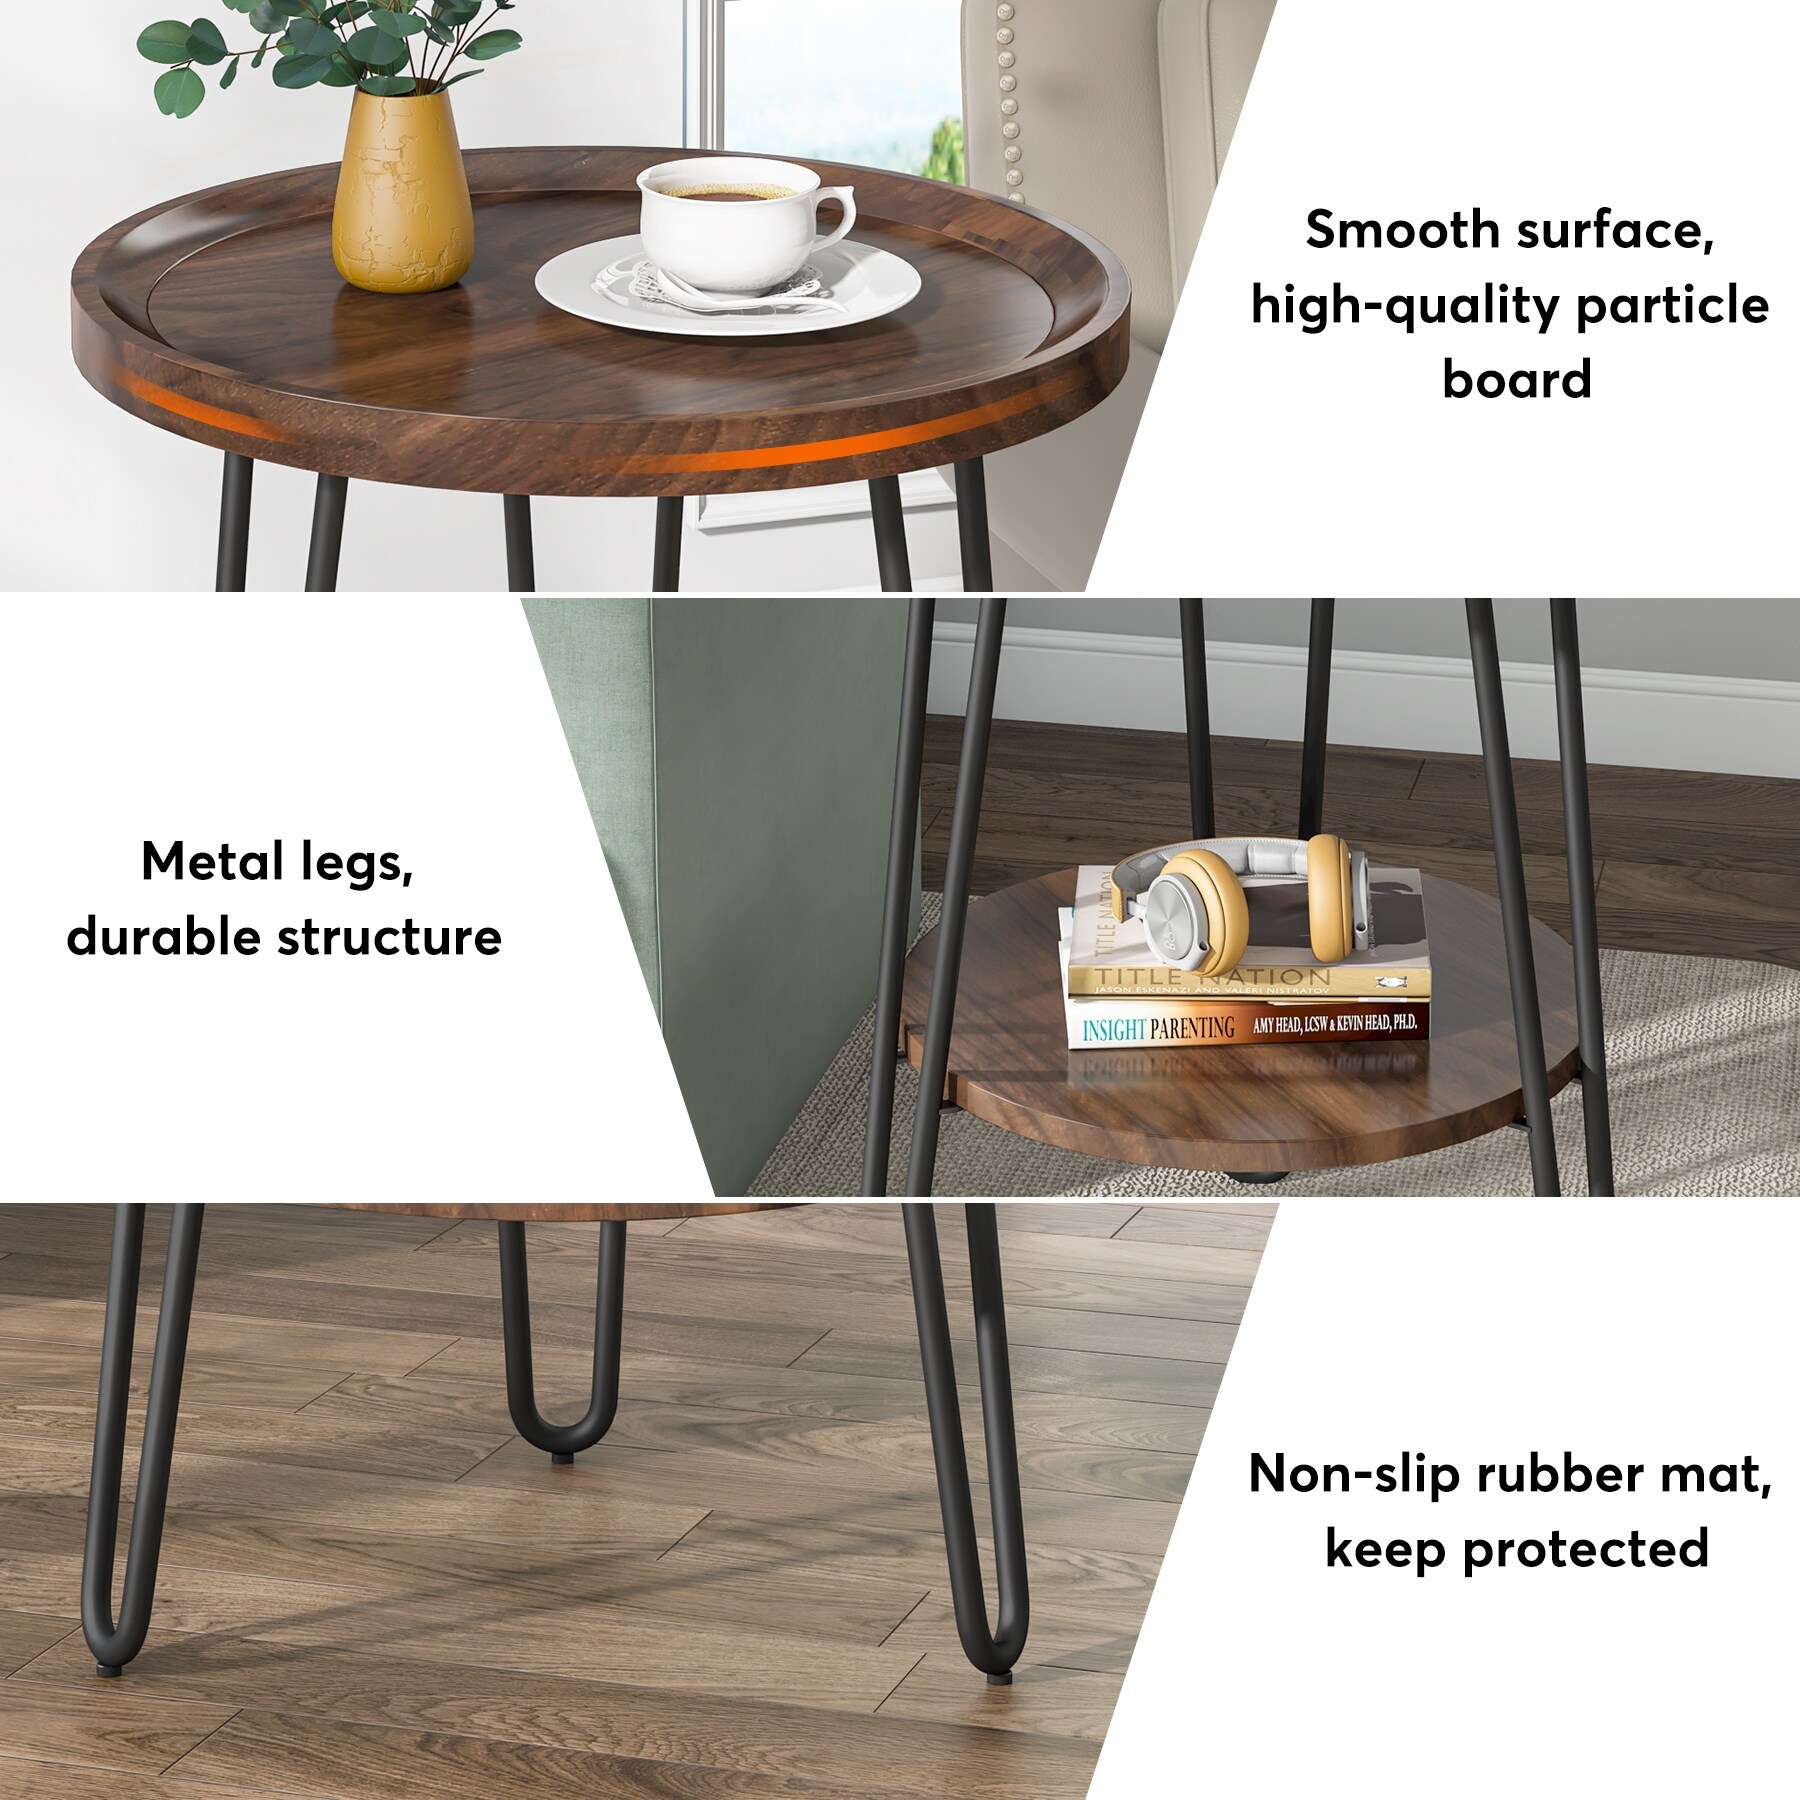 2-Tier Round Side Table, Wooden End Table with Metal Legs - wood